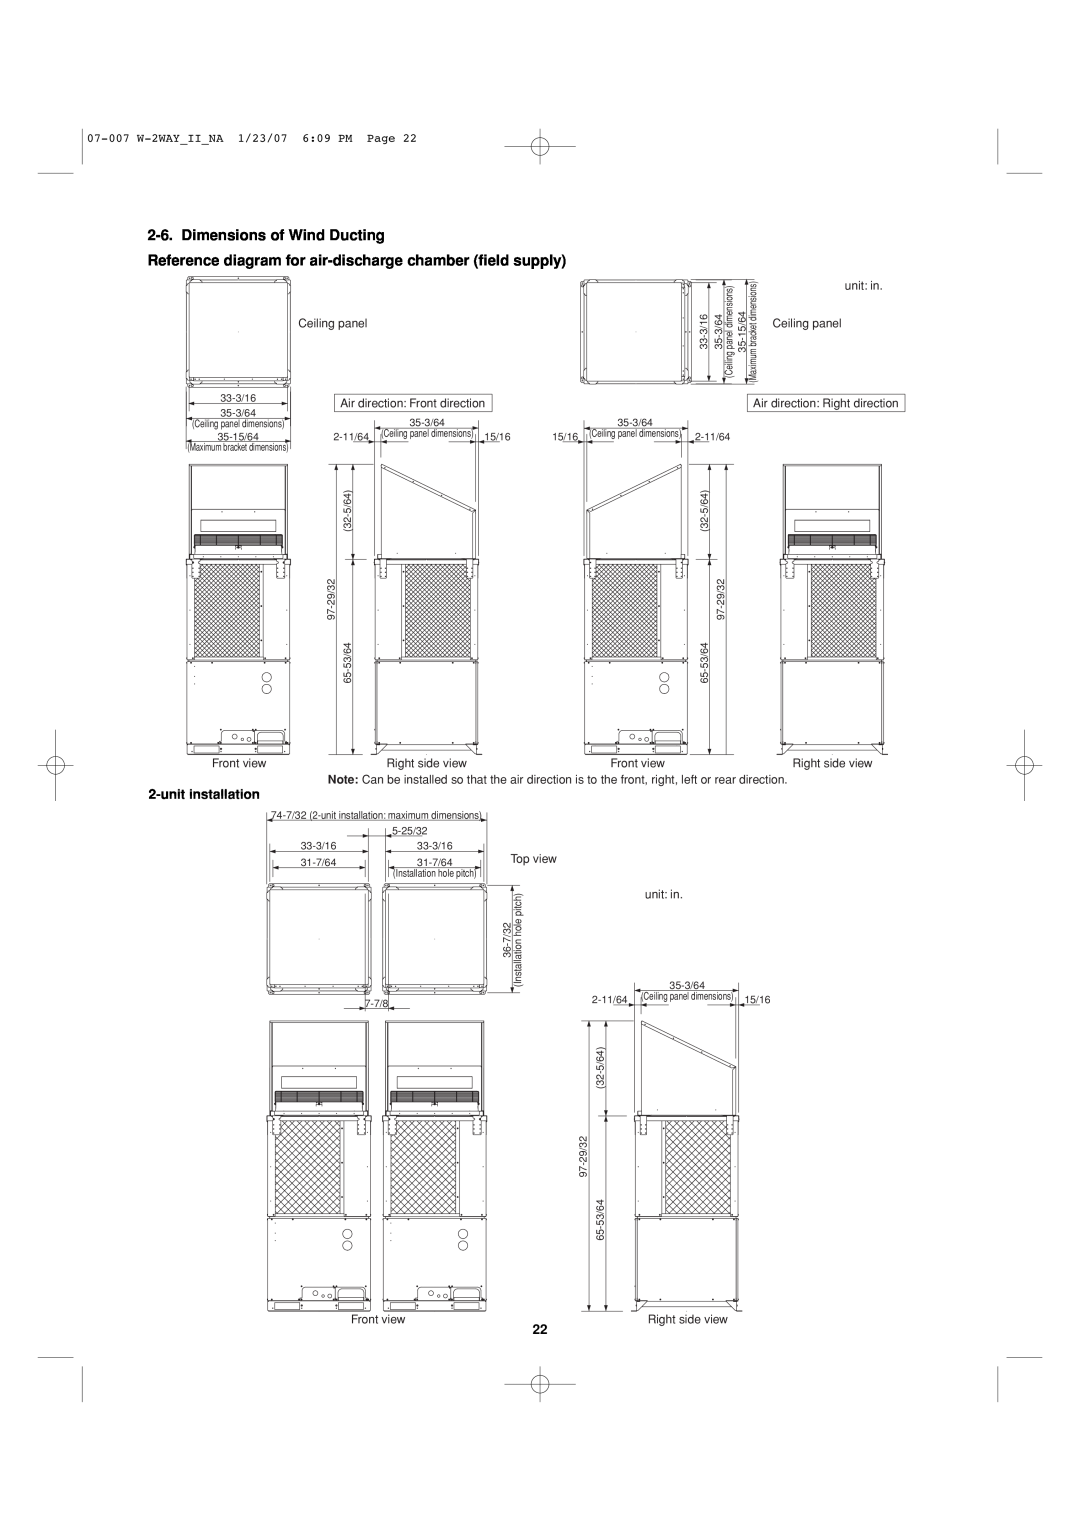 Sanyo 85464359982001 installation instructions Dimensions of Wind Ducting, unitinstallation 